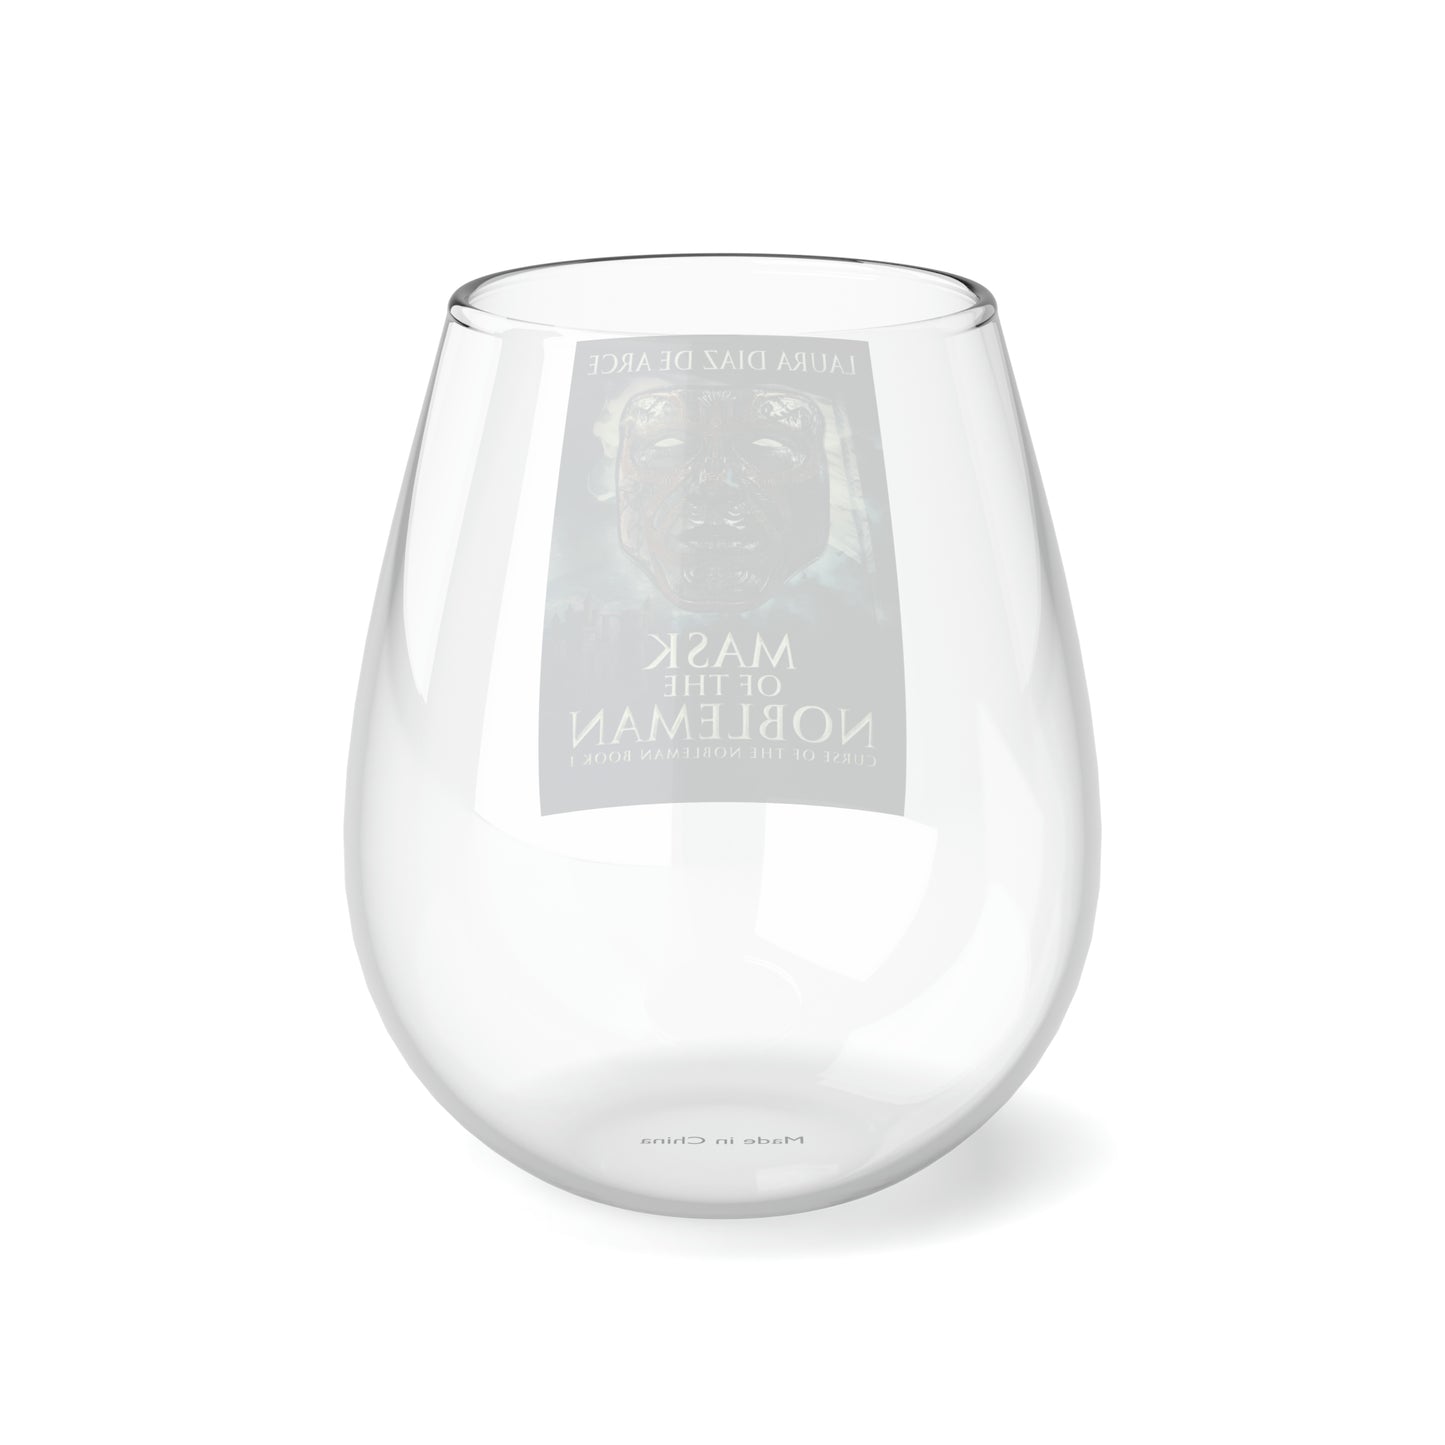 Mask Of The Nobleman - Stemless Wine Glass, 11.75oz